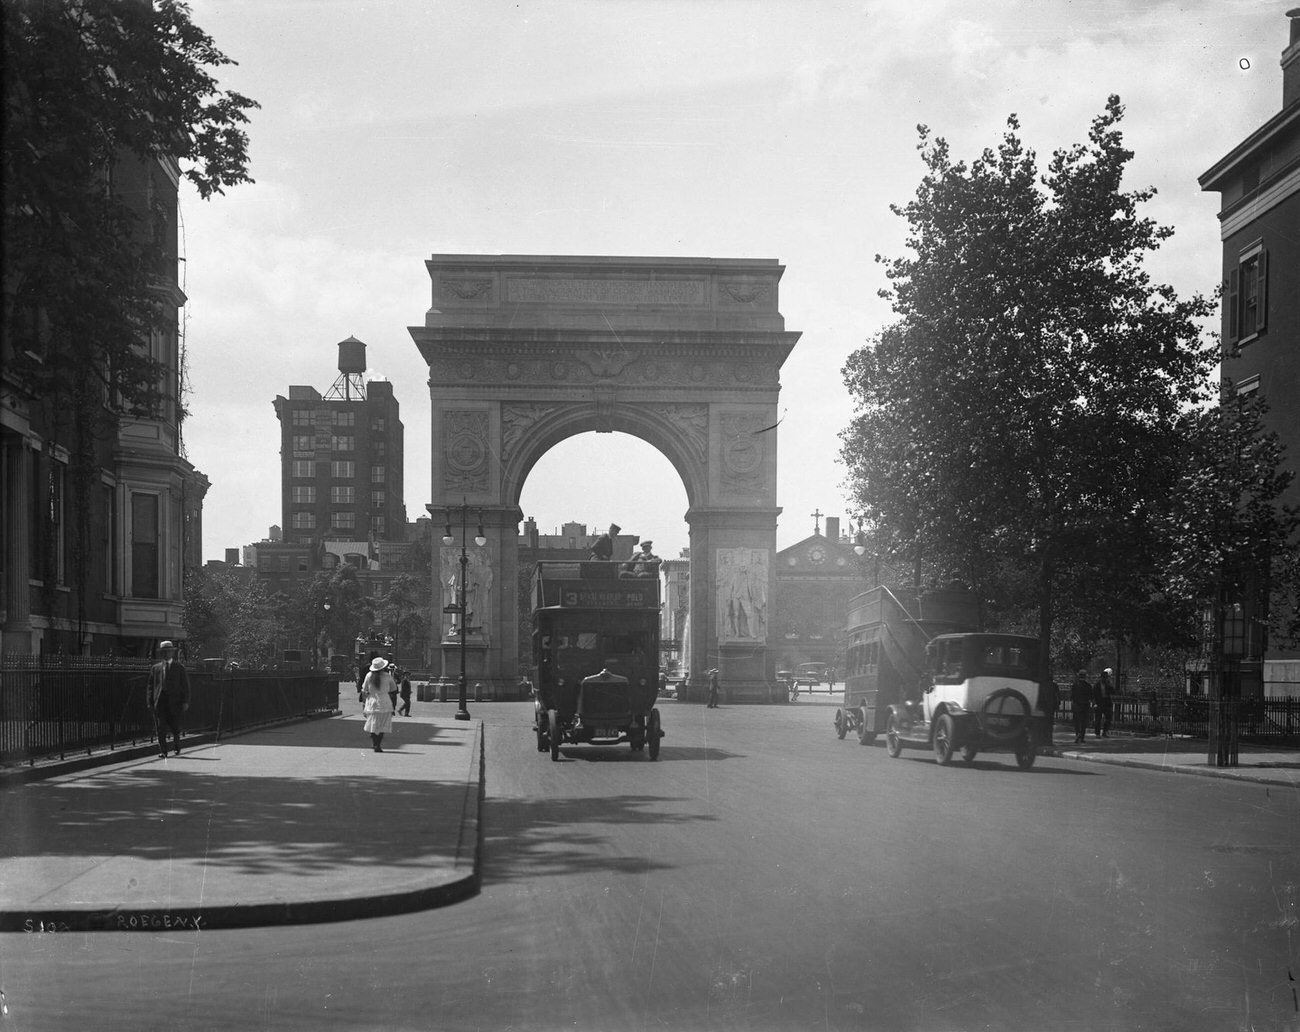 Fifth Avenue Near 8Th Street, Looking South Towards Washington Square Arch, With Pedestrians And Double Decker Bus, 1920S